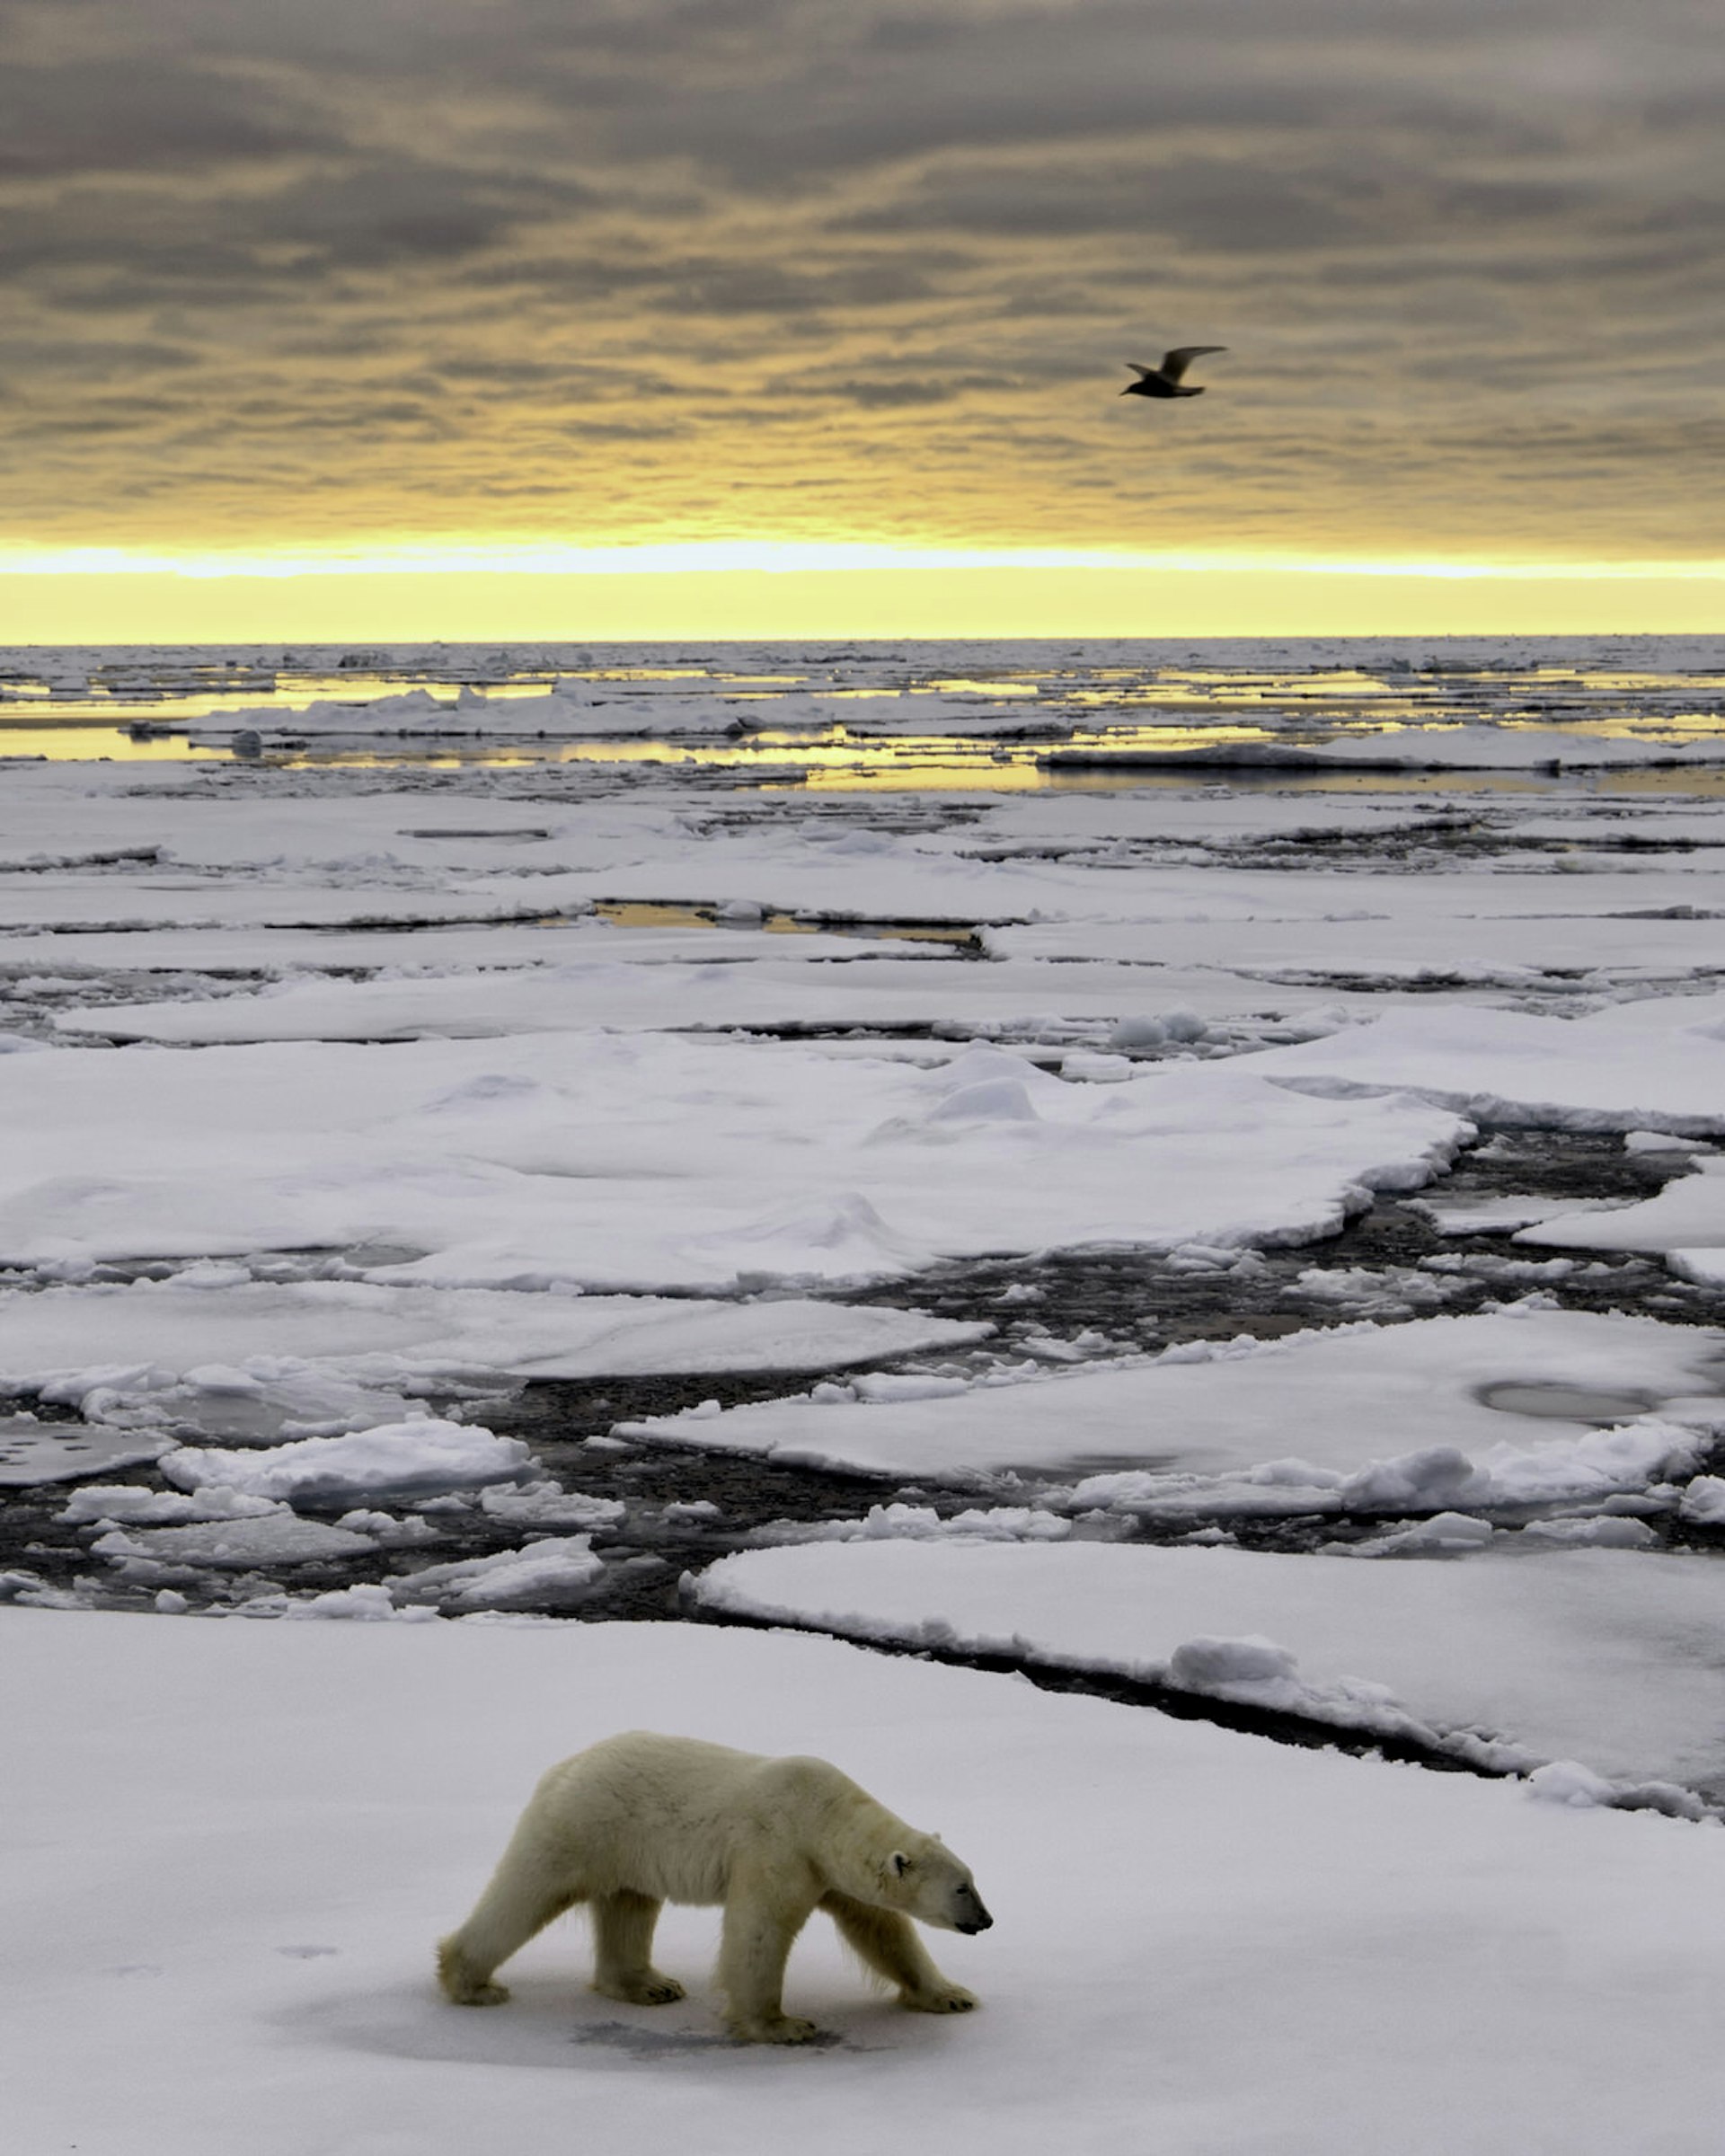 A polar bear exploring the pack ice at sunrise in Spitsbergen, Svalbard © Justinreznick / Getty Images